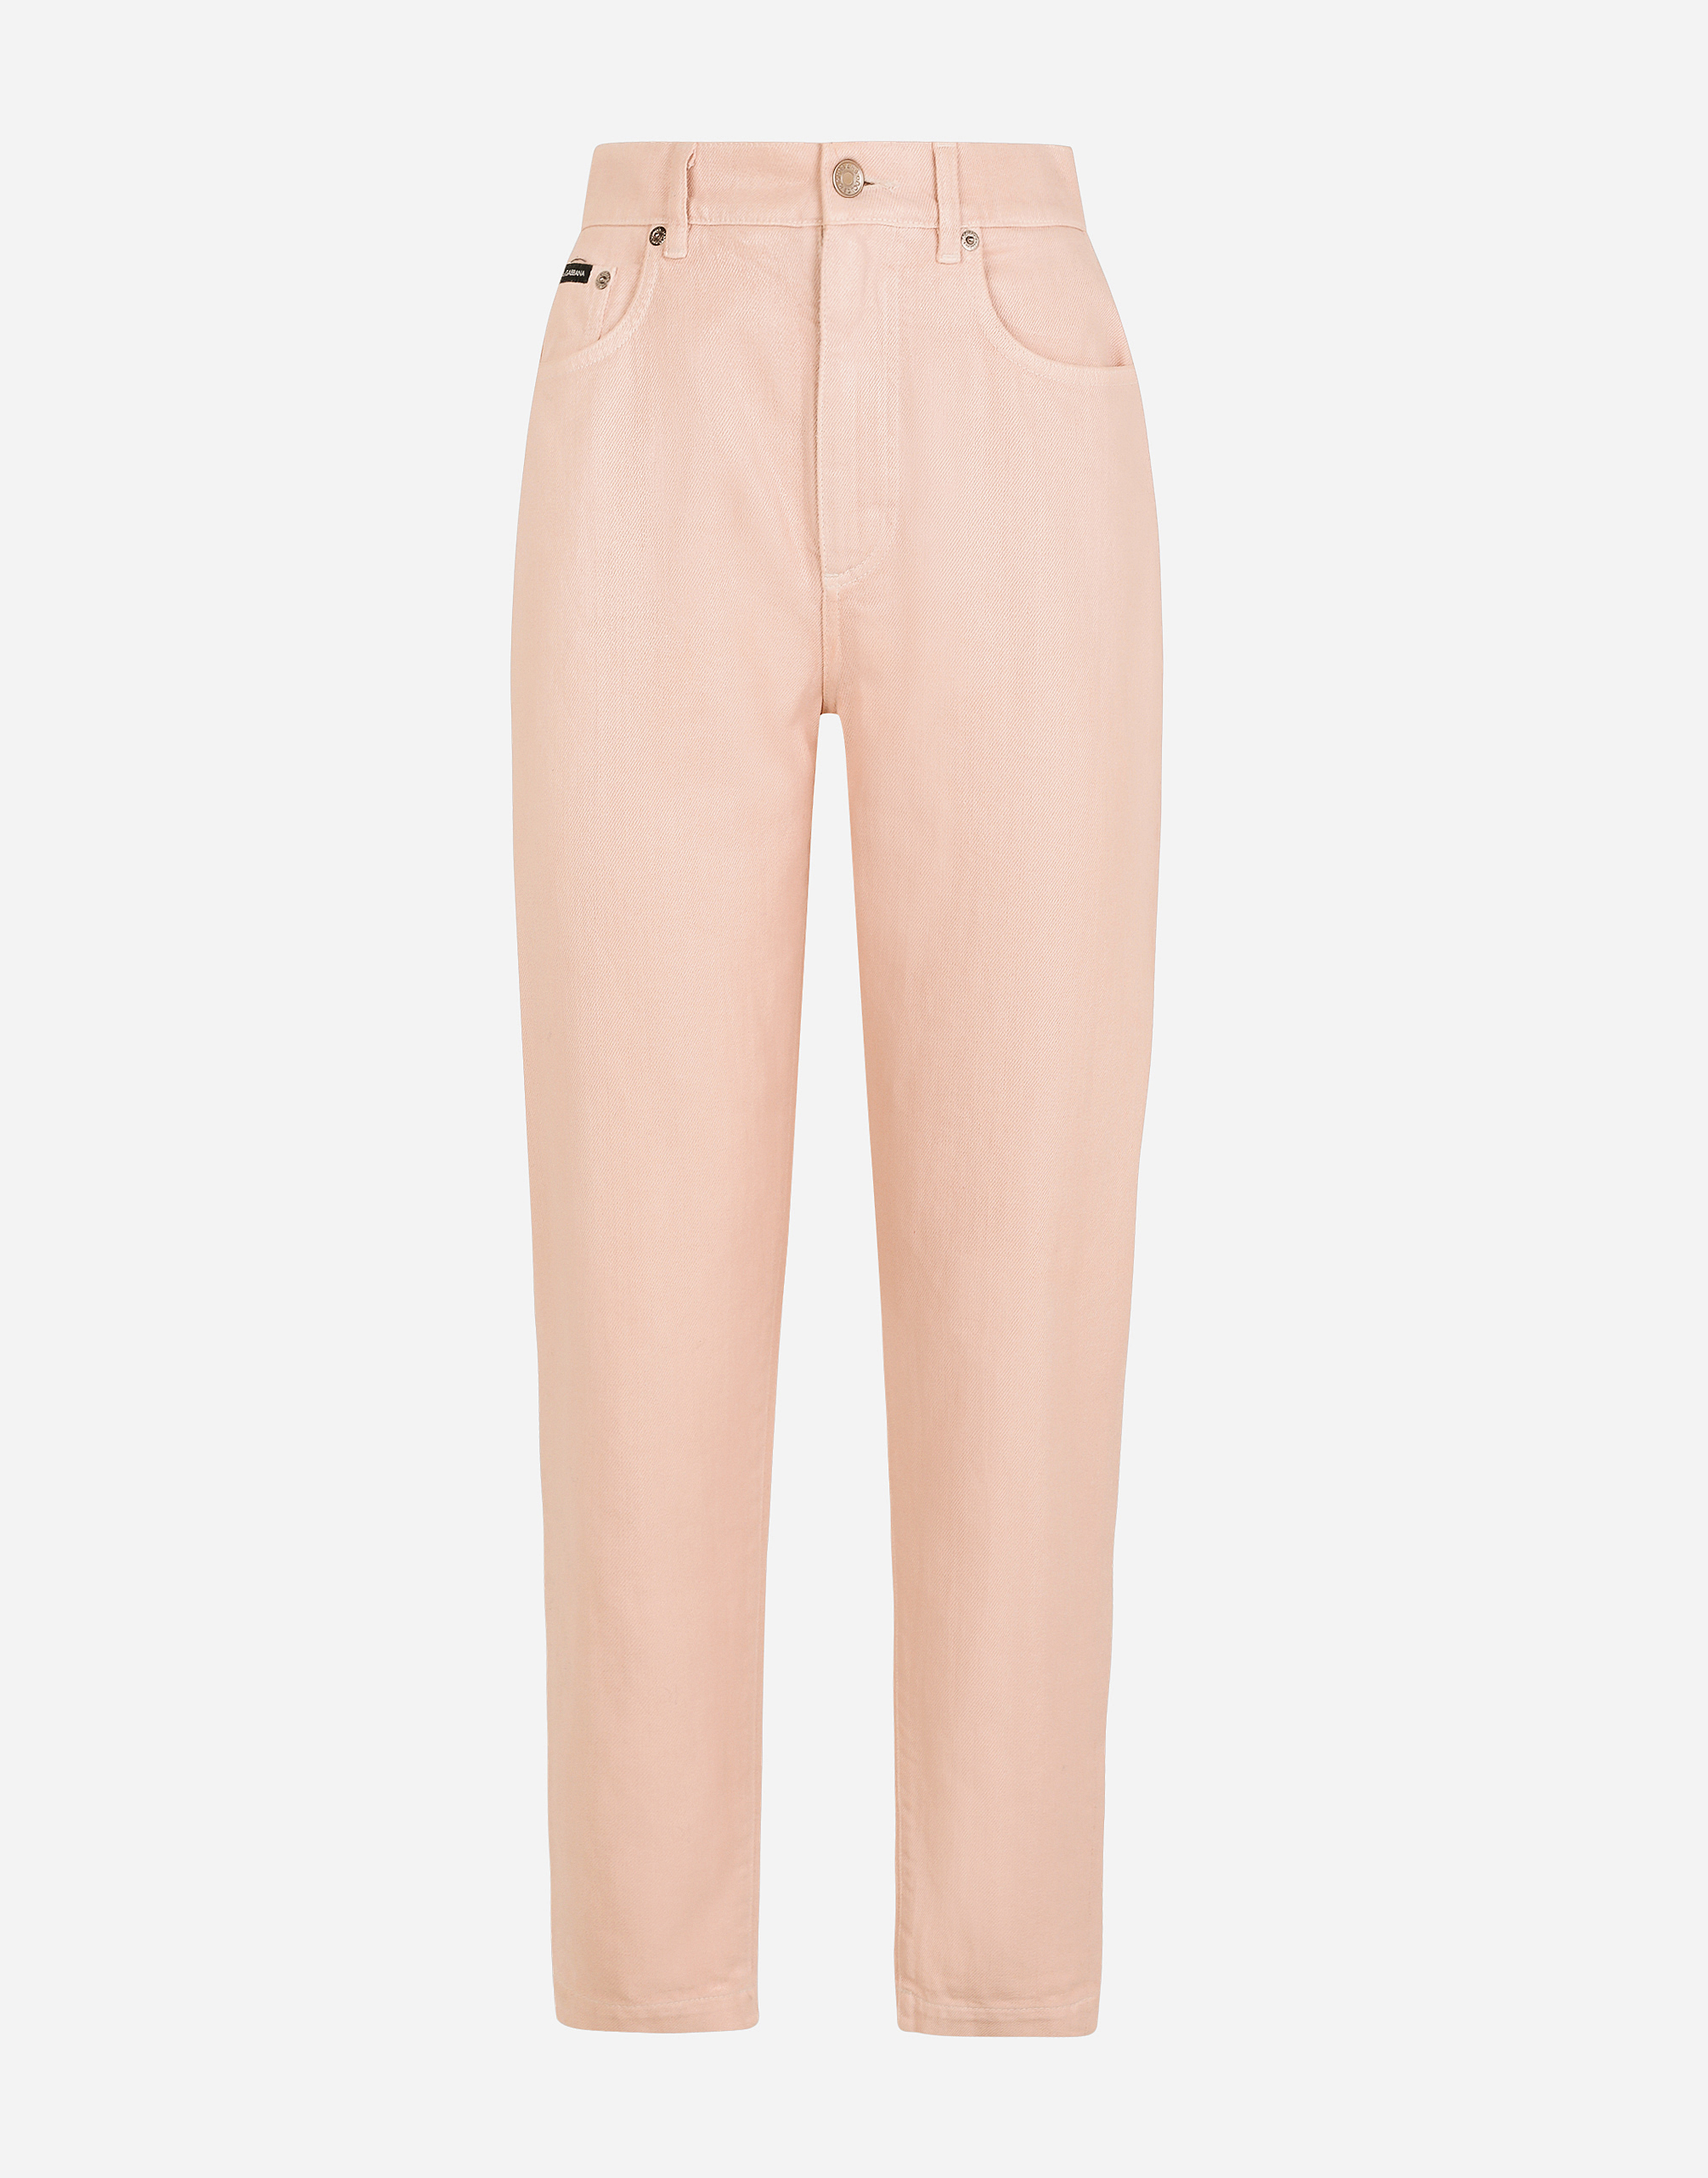 Frosted denim Amber jeans  in Pale Pink